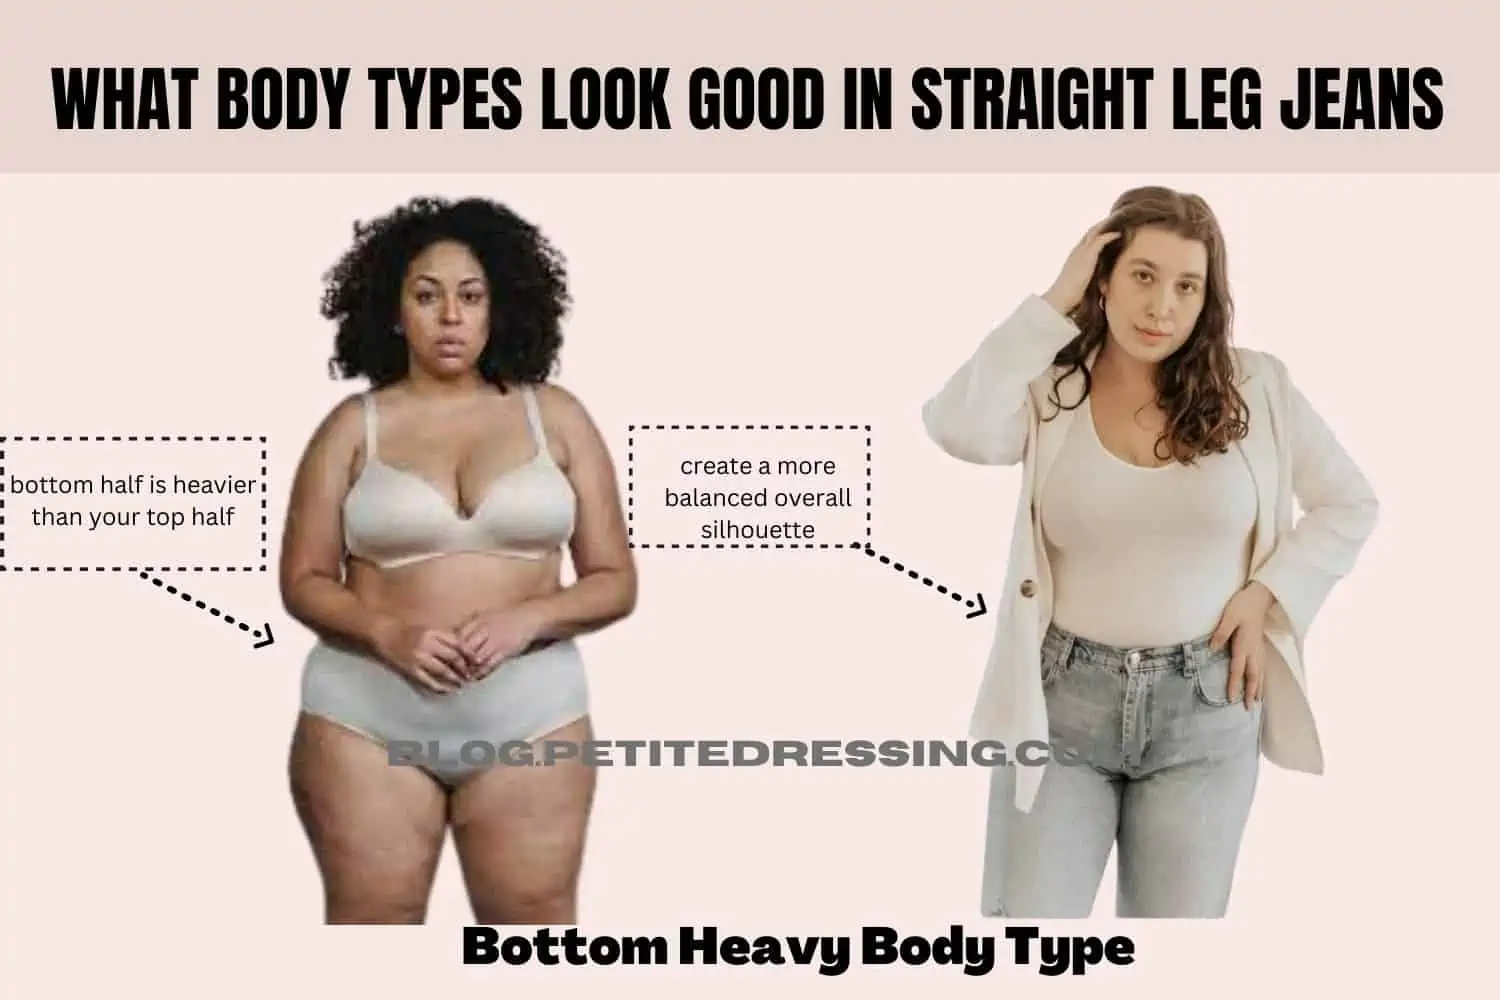 What Body Types Look Good in Straight-Leg Jeans